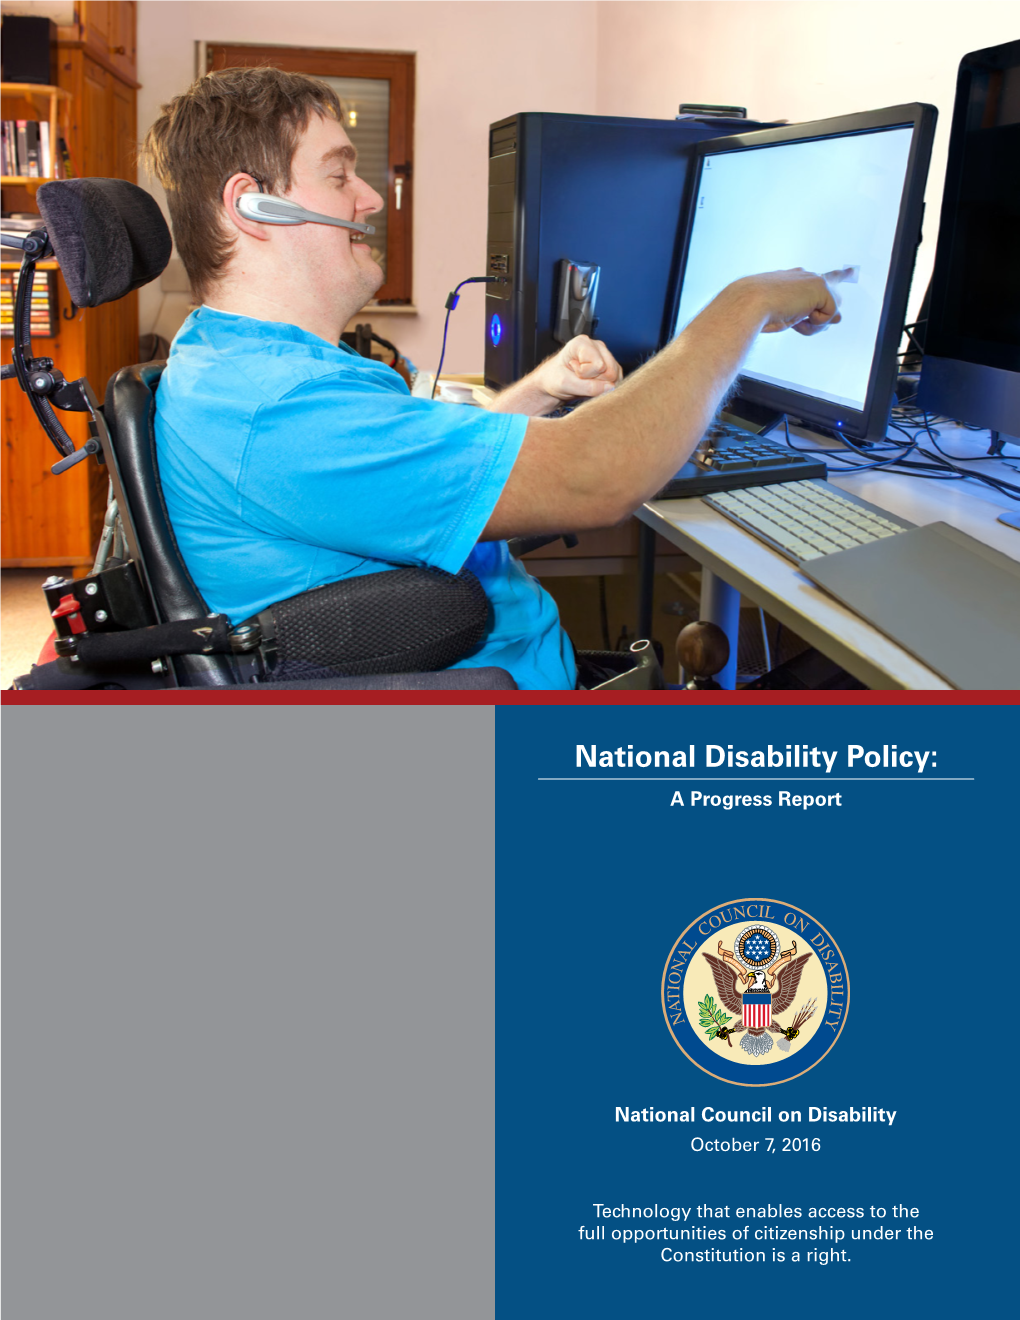 National Disability Policy: a Progress Report